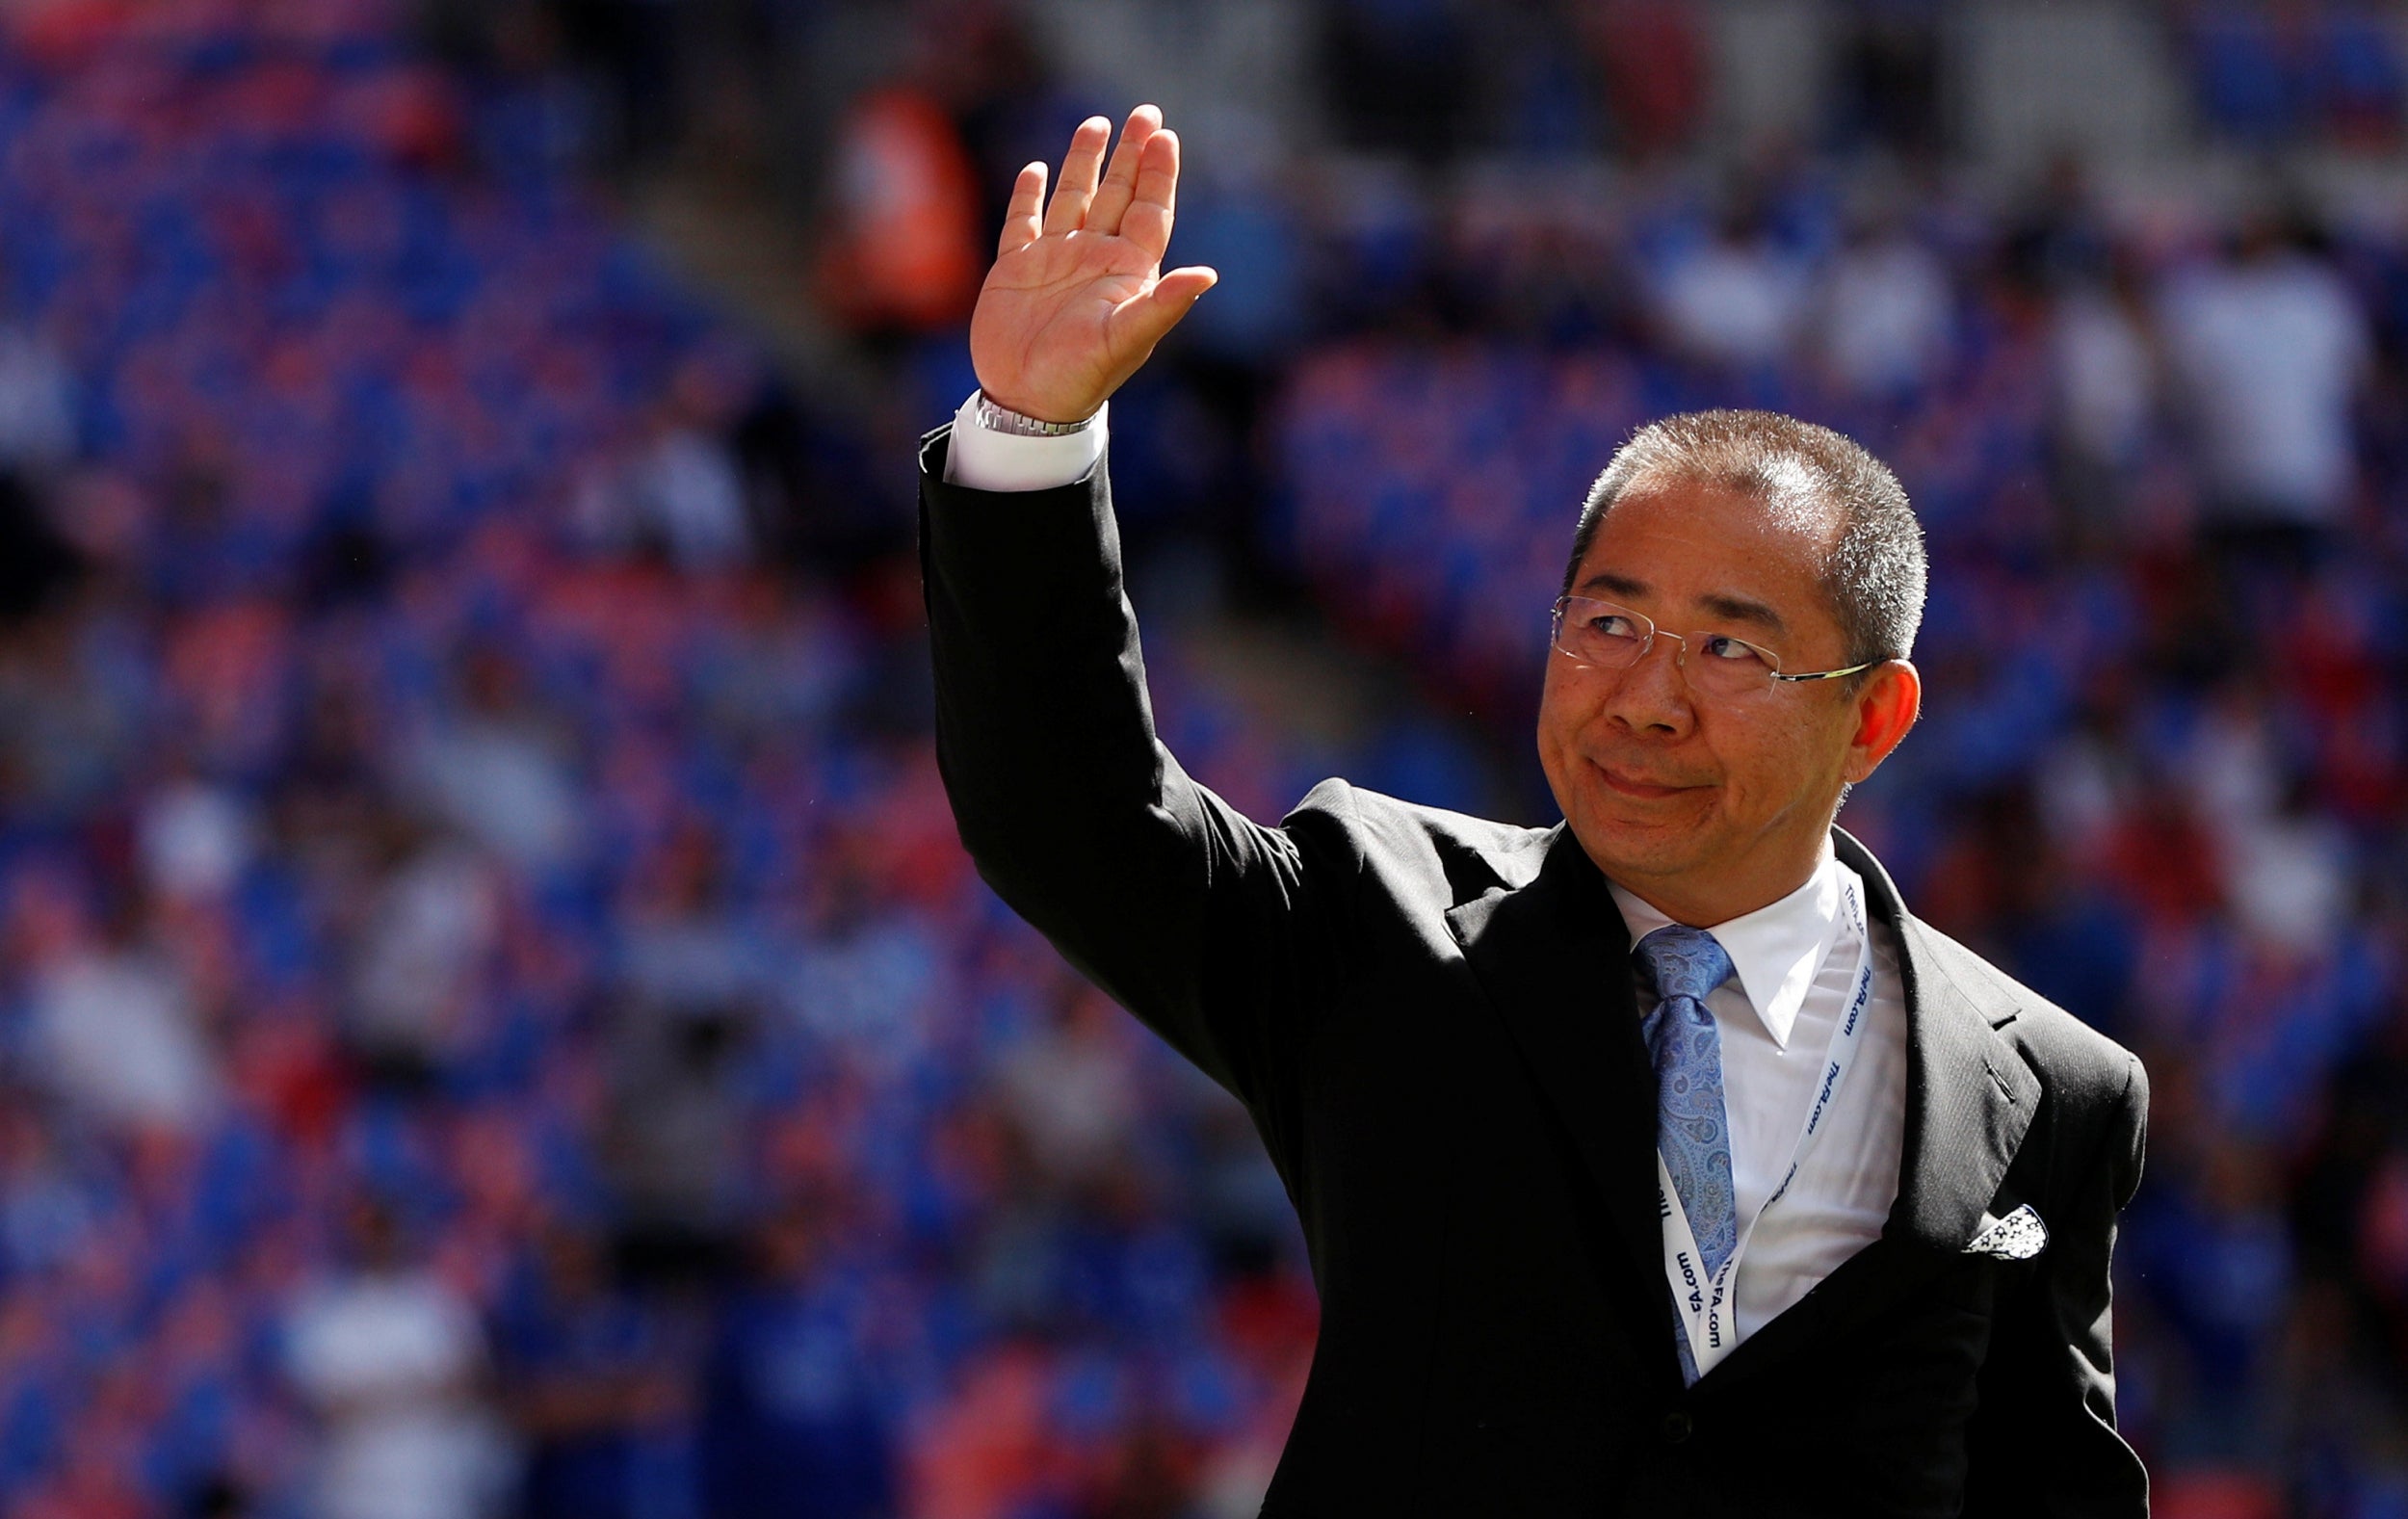 Leicester City helicopter crash: Club confirms owner Vichai Srivaddhanaprabha was among five people killed